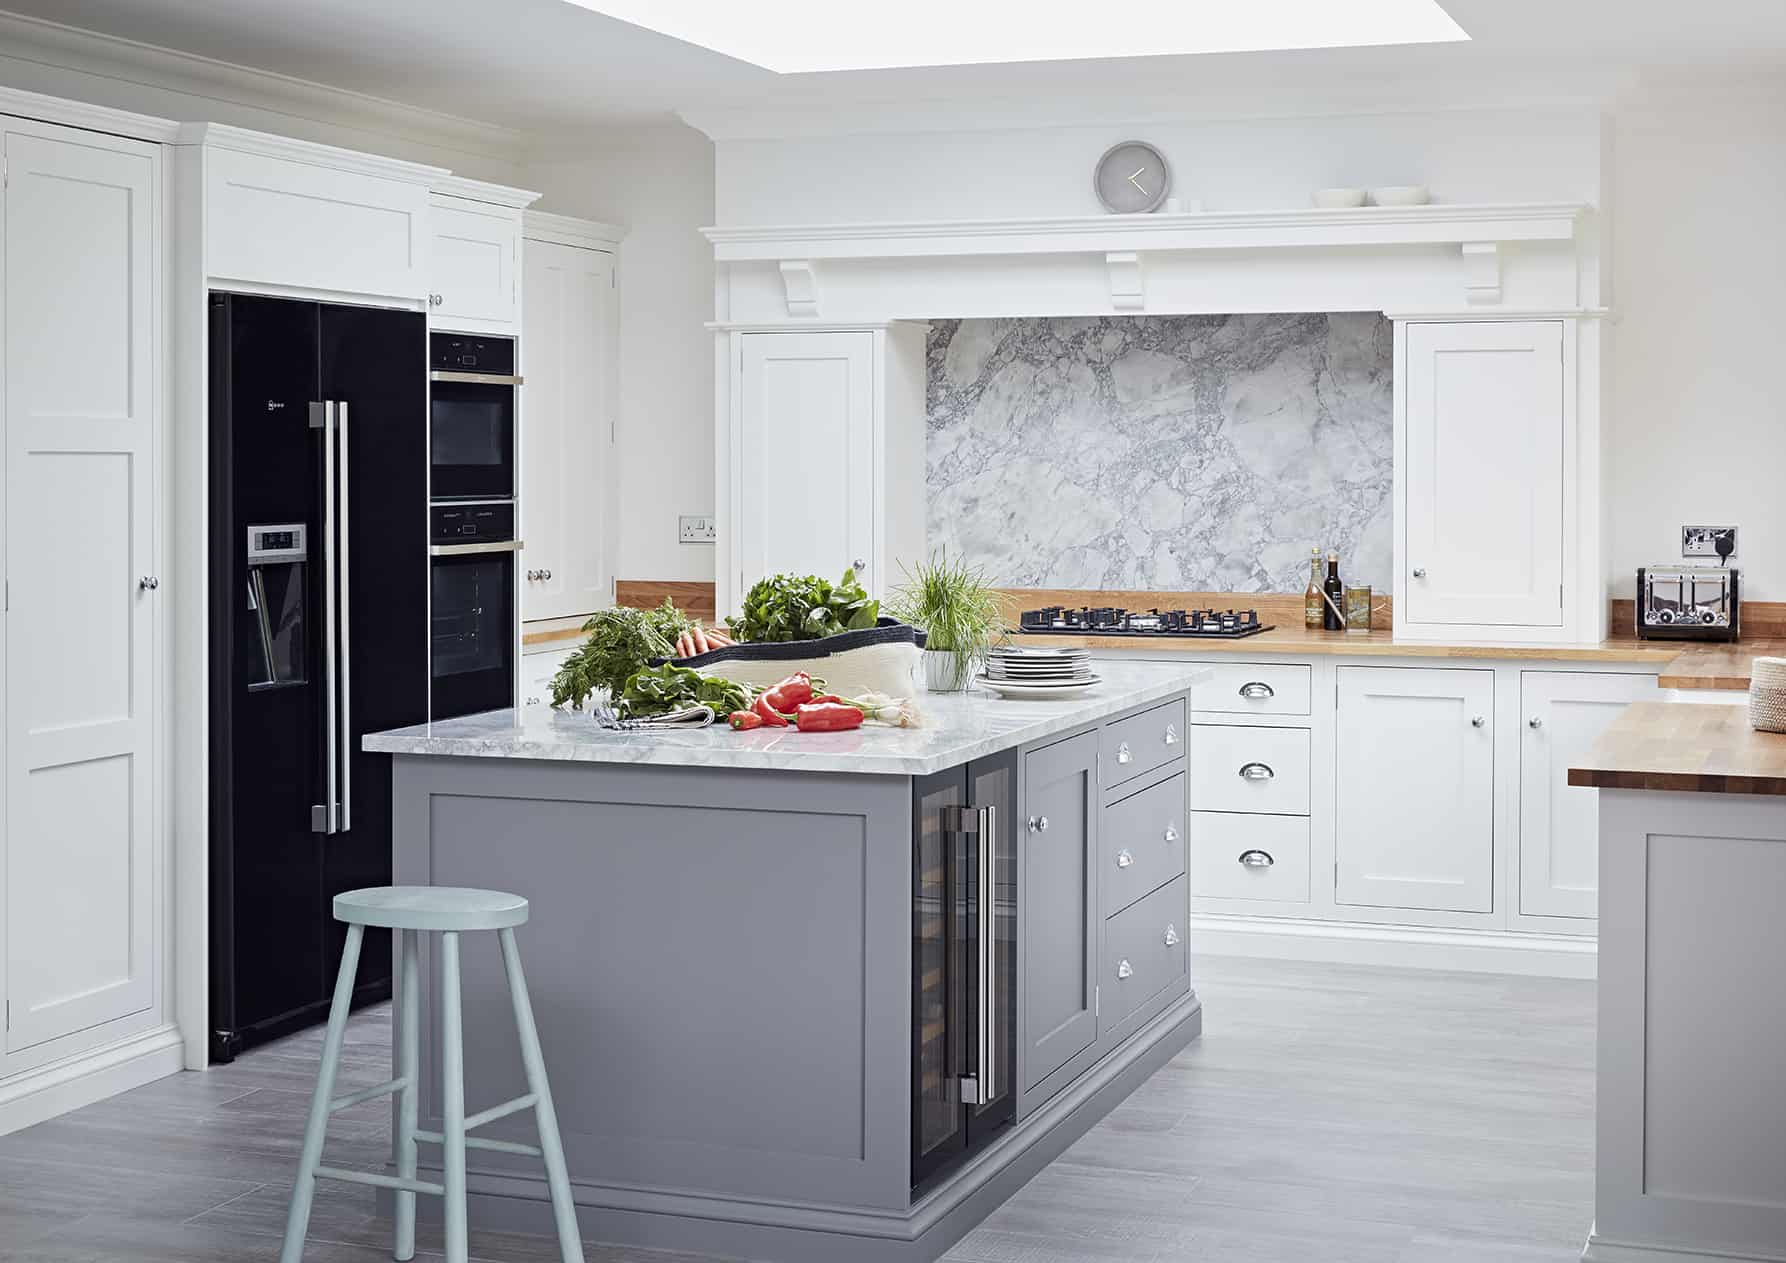 Choosing the Right Kitchen Worktops - John Lewis of Hungerford